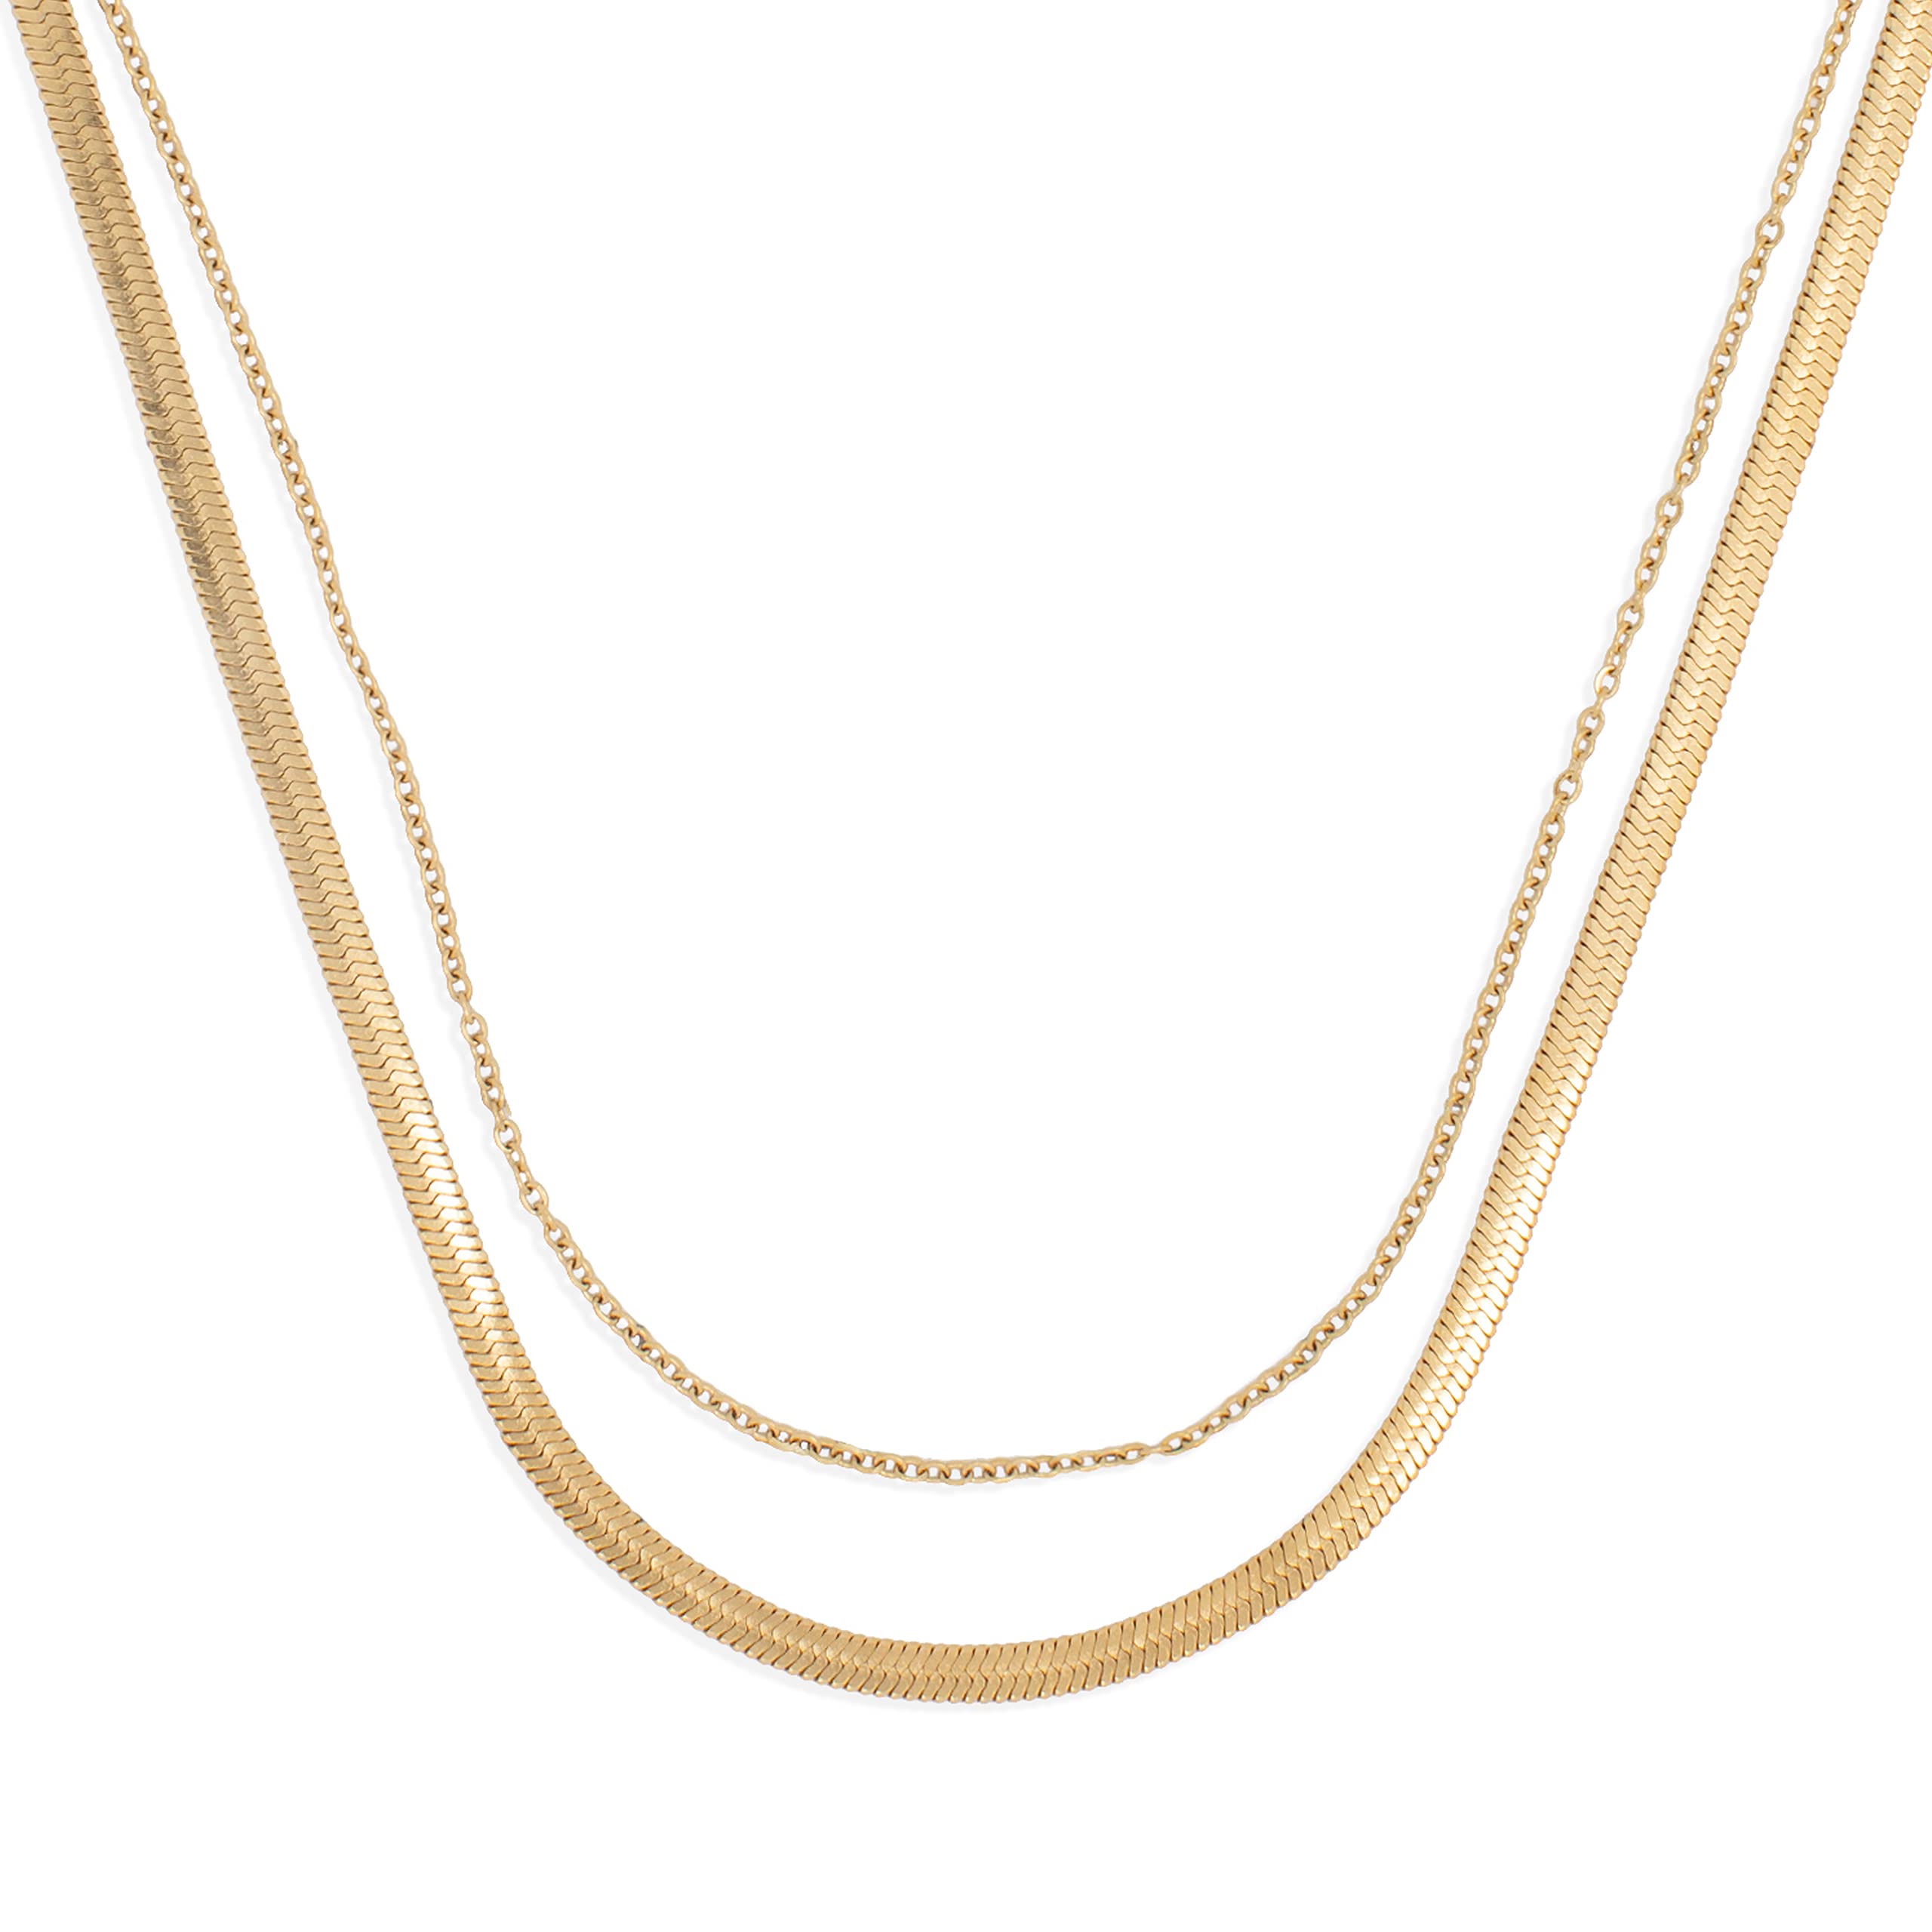 Hey Harper Born Ready Necklace - Waterproof & Sweat-Proof Layered Necklaces for Women - Gold Necklace for Women - Stainless Steel Necklace - Chain Necklace with 14k Golden Color PVD Coating - Aesthetic Herringbone Chain for Women for Everyday Wear